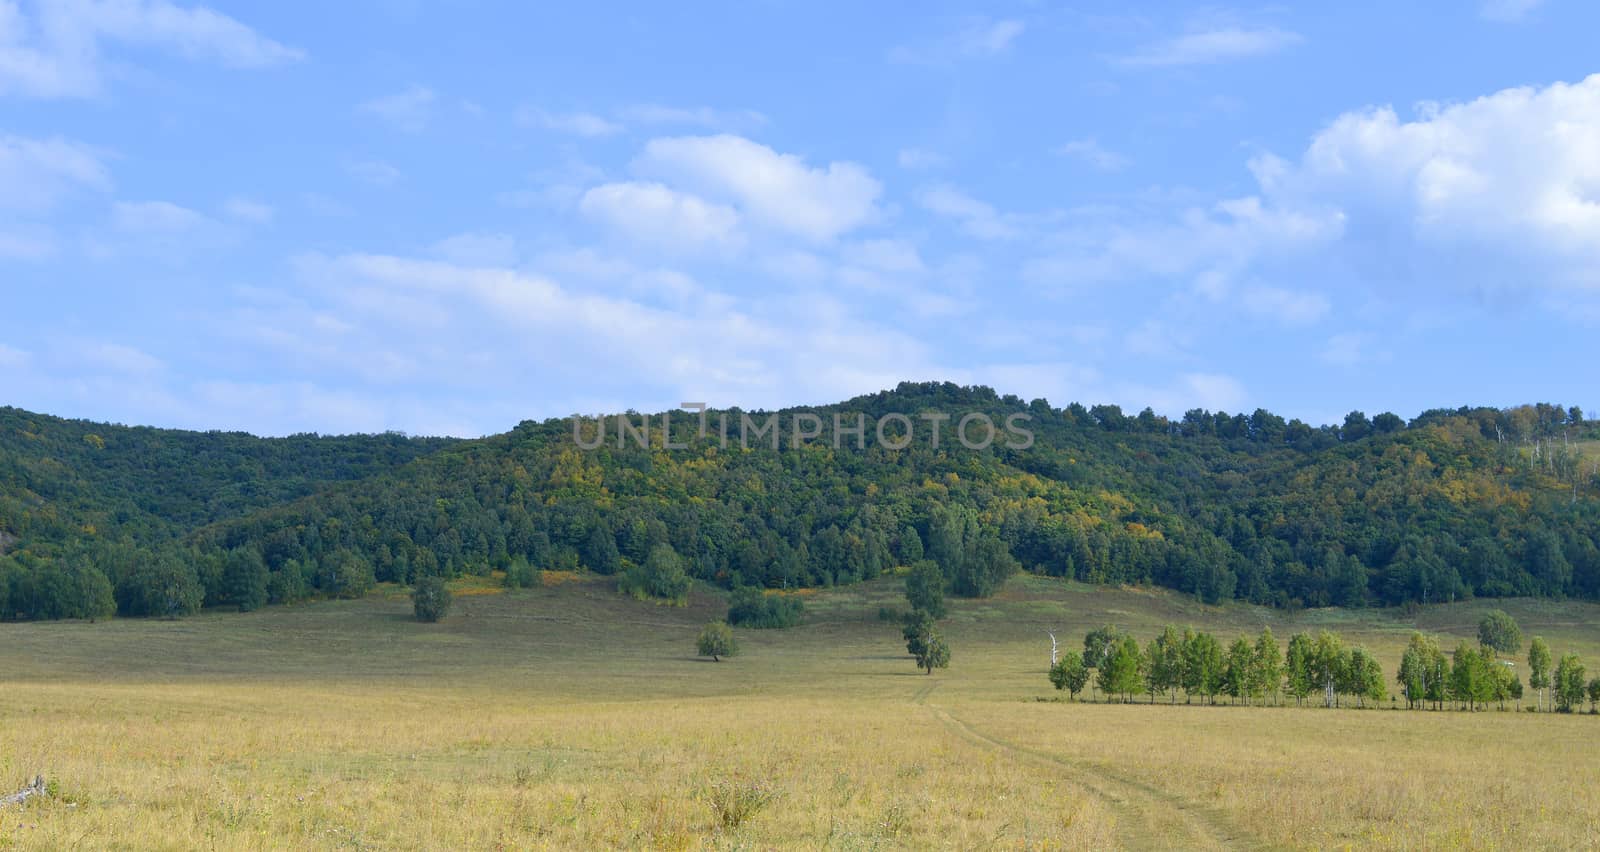 Summer landscape with mountain by sergpet